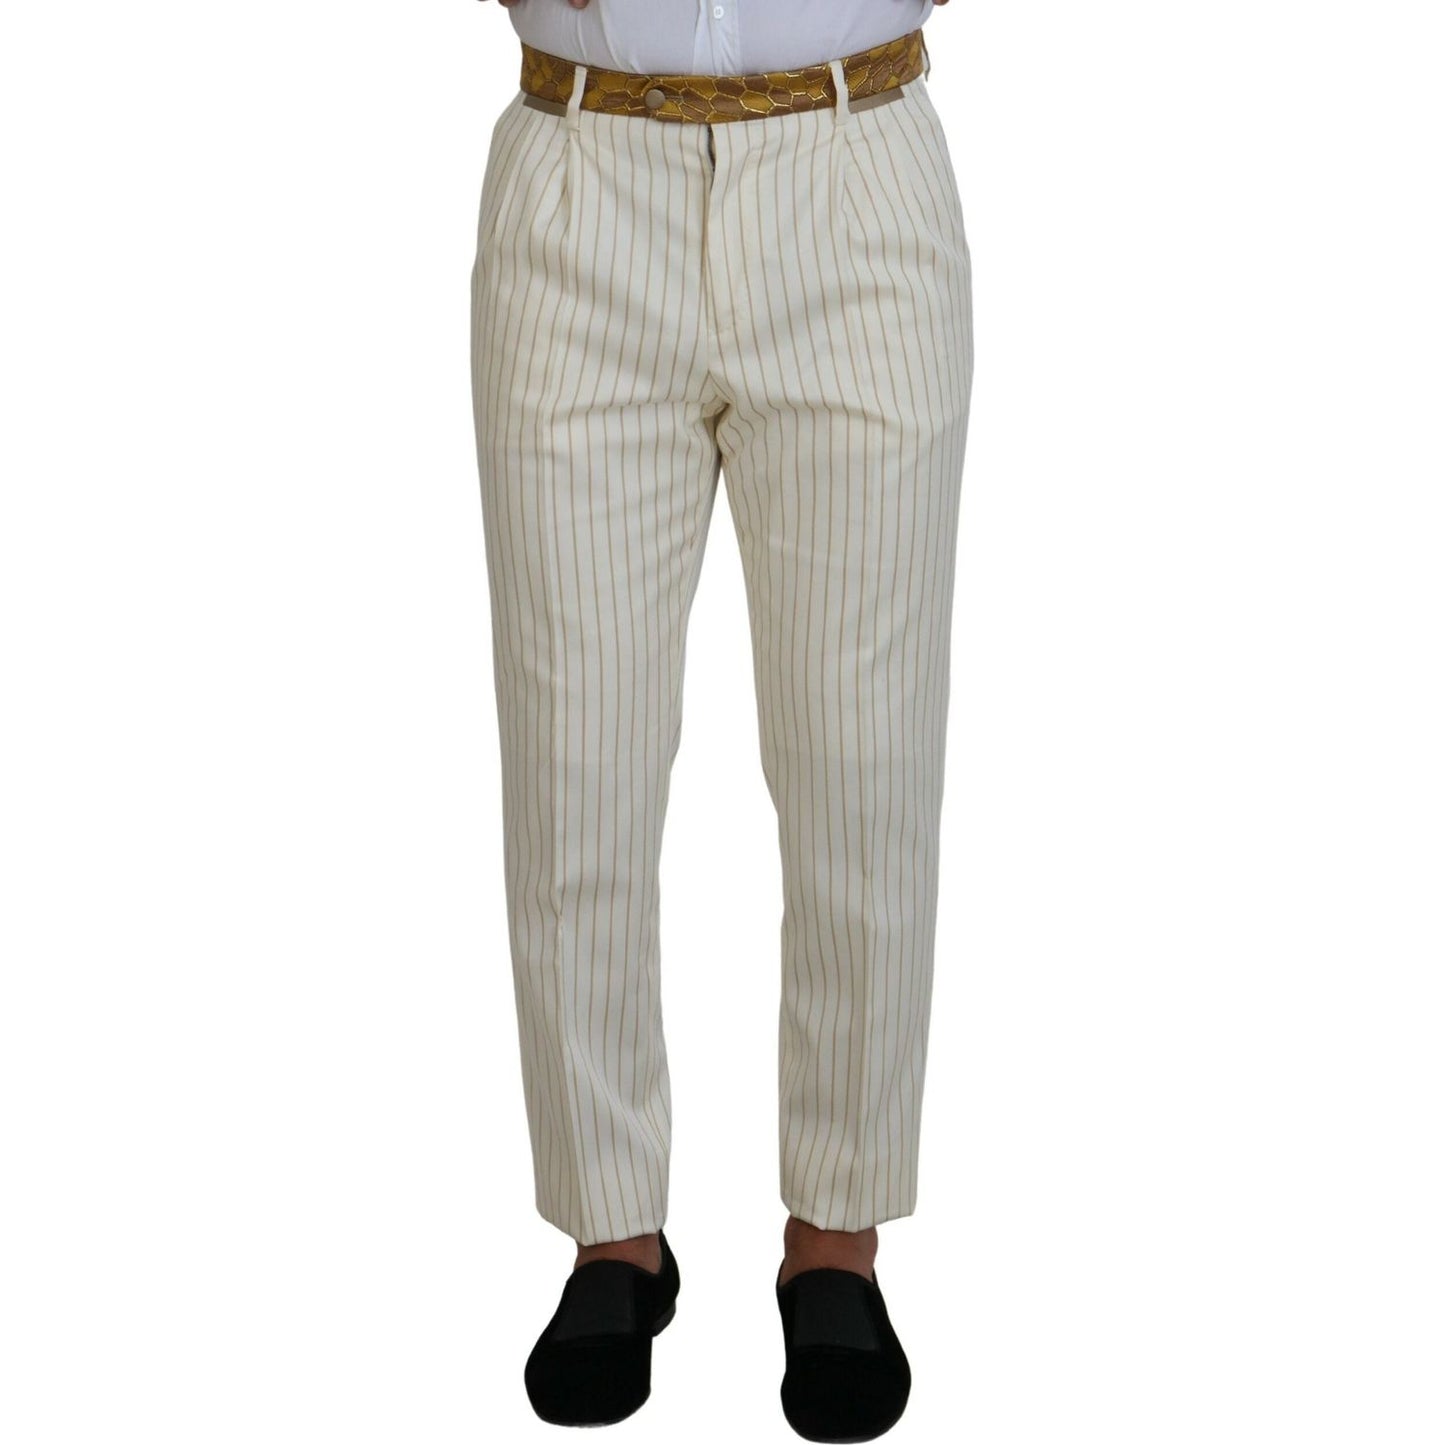 Dolce & Gabbana Elegant Off White Double Breasted Suit off-white-gold-striped-tuxedo-slim-fit-suit